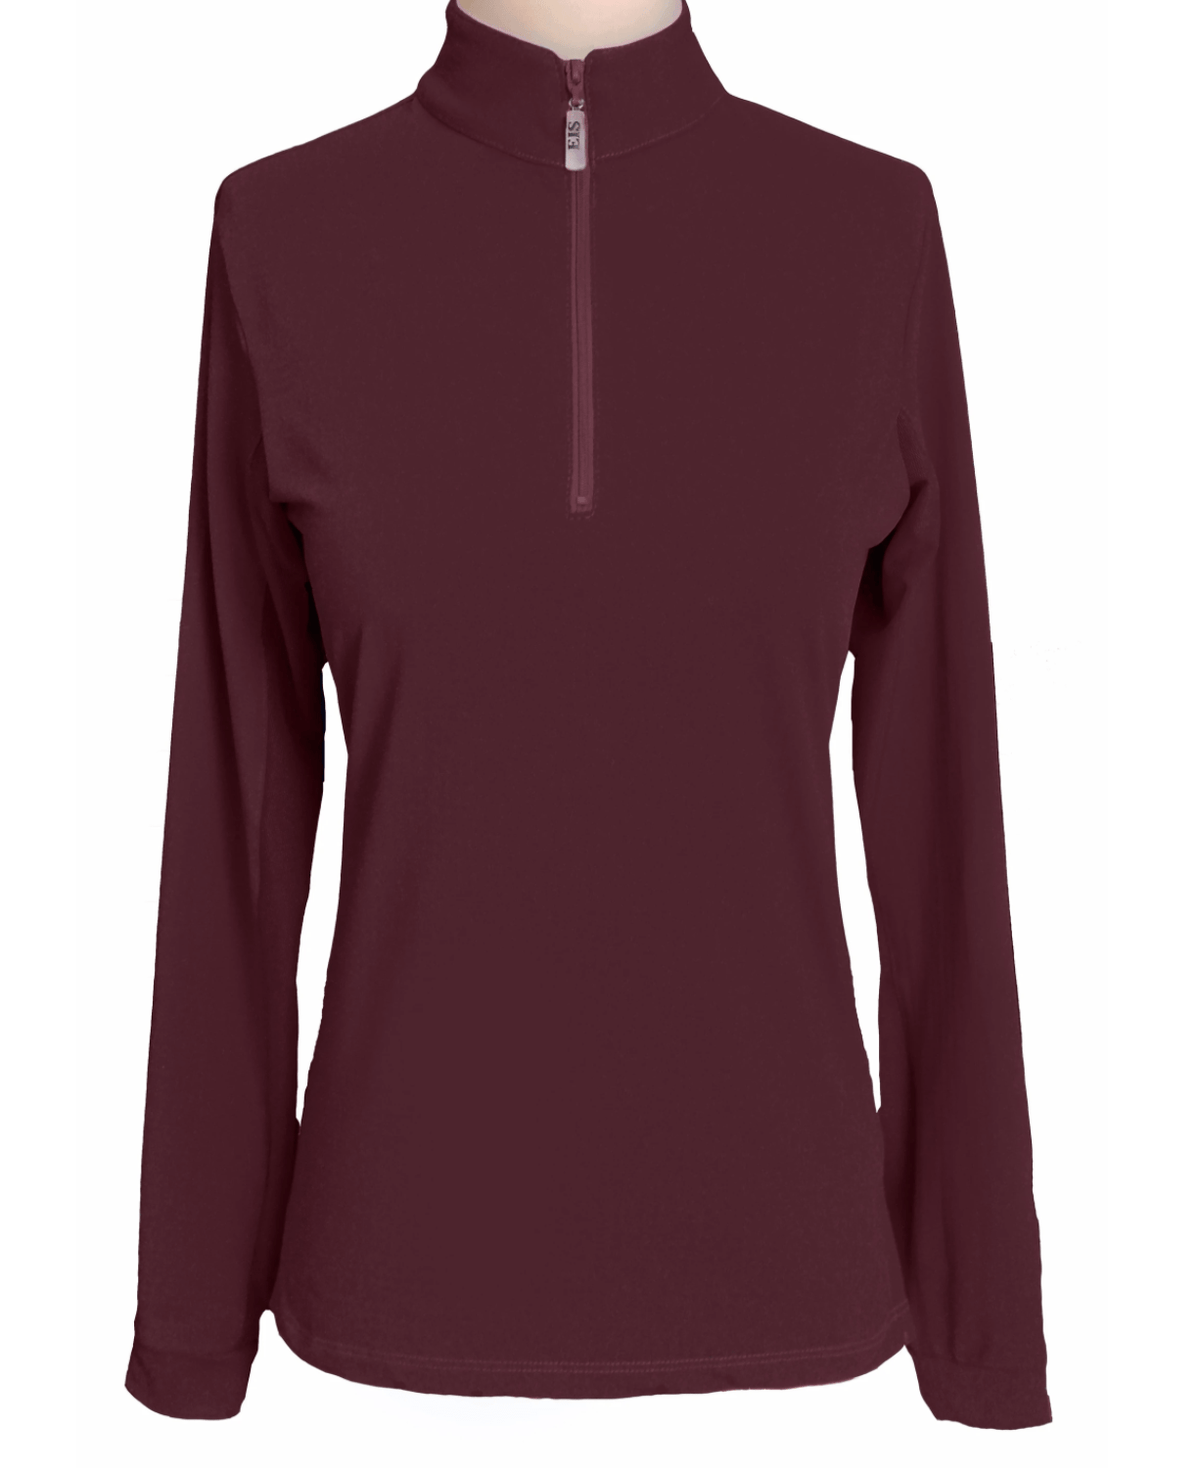 EIS Youth Shirt Maroon EIS- Sun Shirts Youth Large 8-10 equestrian team apparel online tack store mobile tack store custom farm apparel custom show stable clothing equestrian lifestyle horse show clothing riding clothes ETA Kids Equestrian Fashion | EIS Sun Shirts horses equestrian tack store